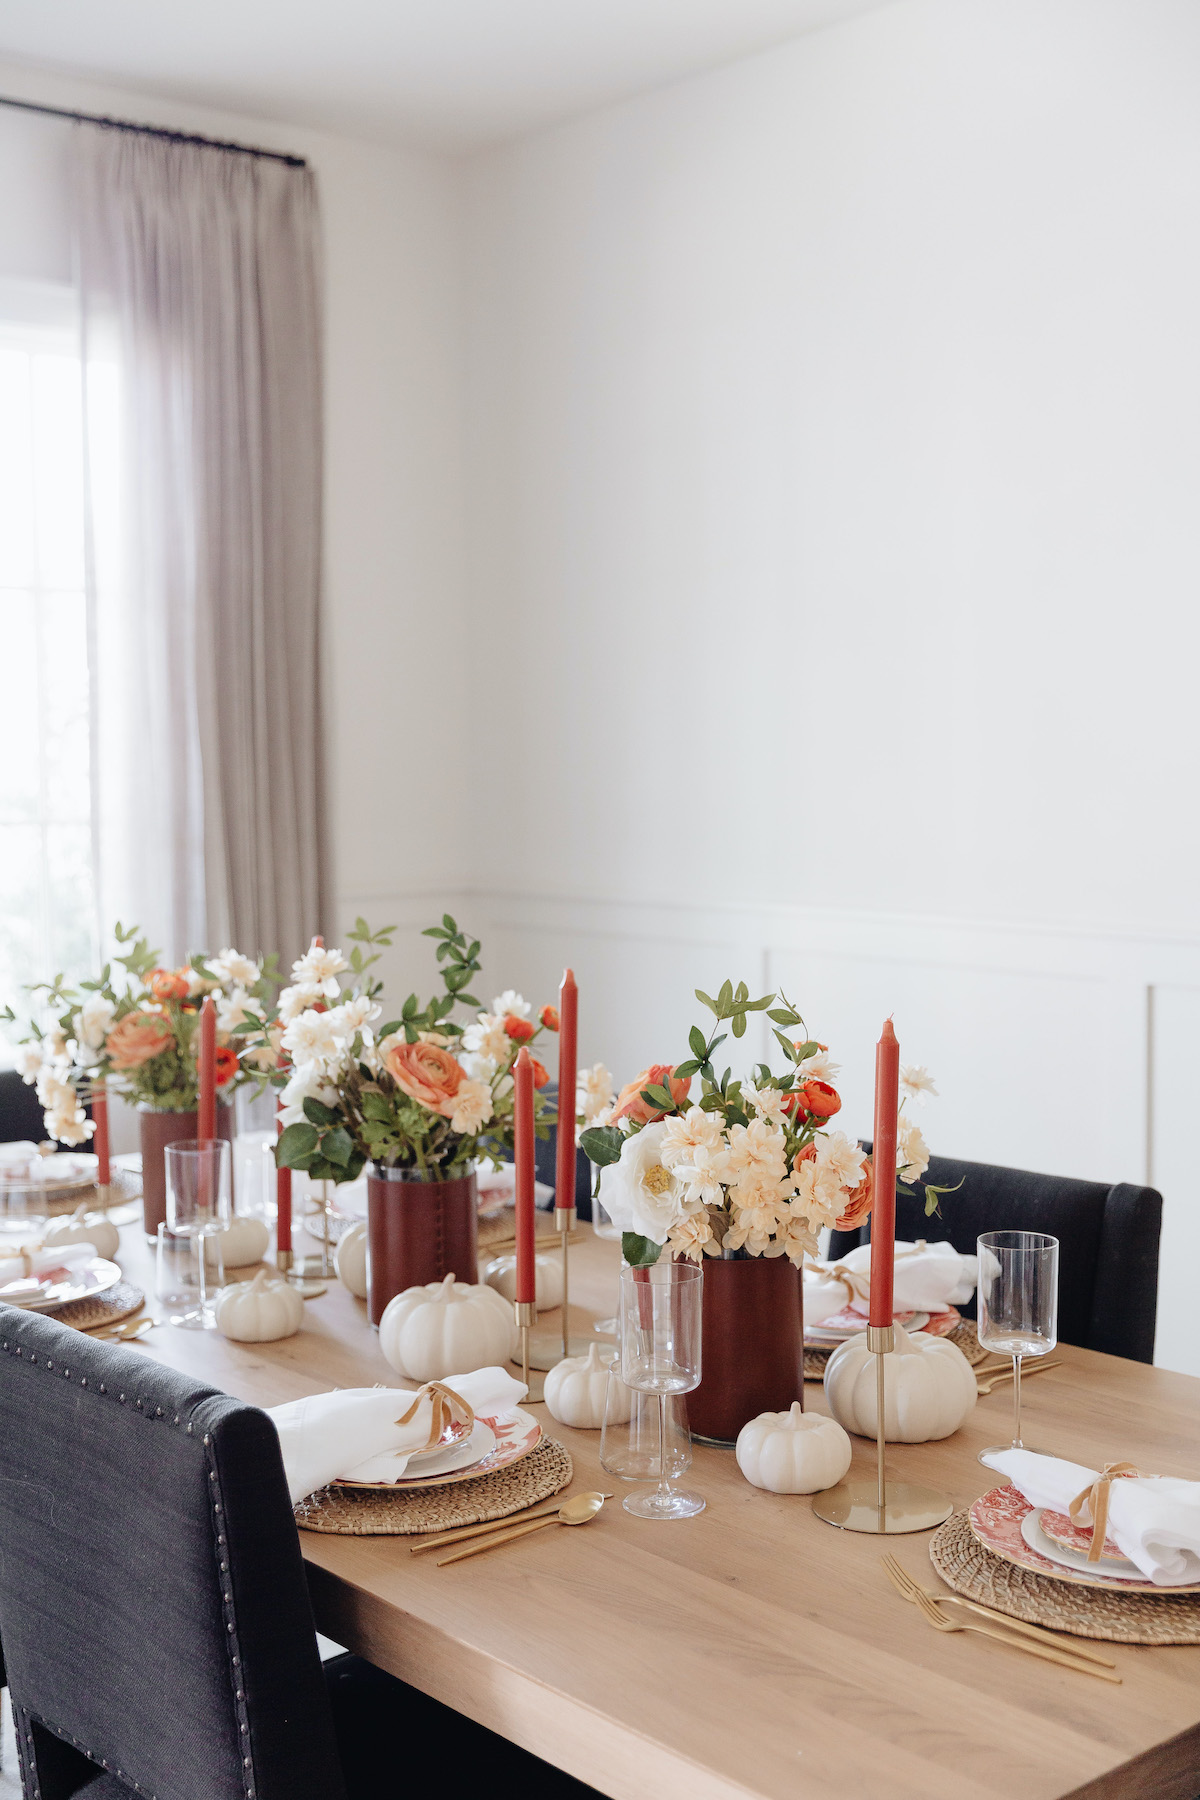 Brighton Butler Fall Tablescape with orange china and candles